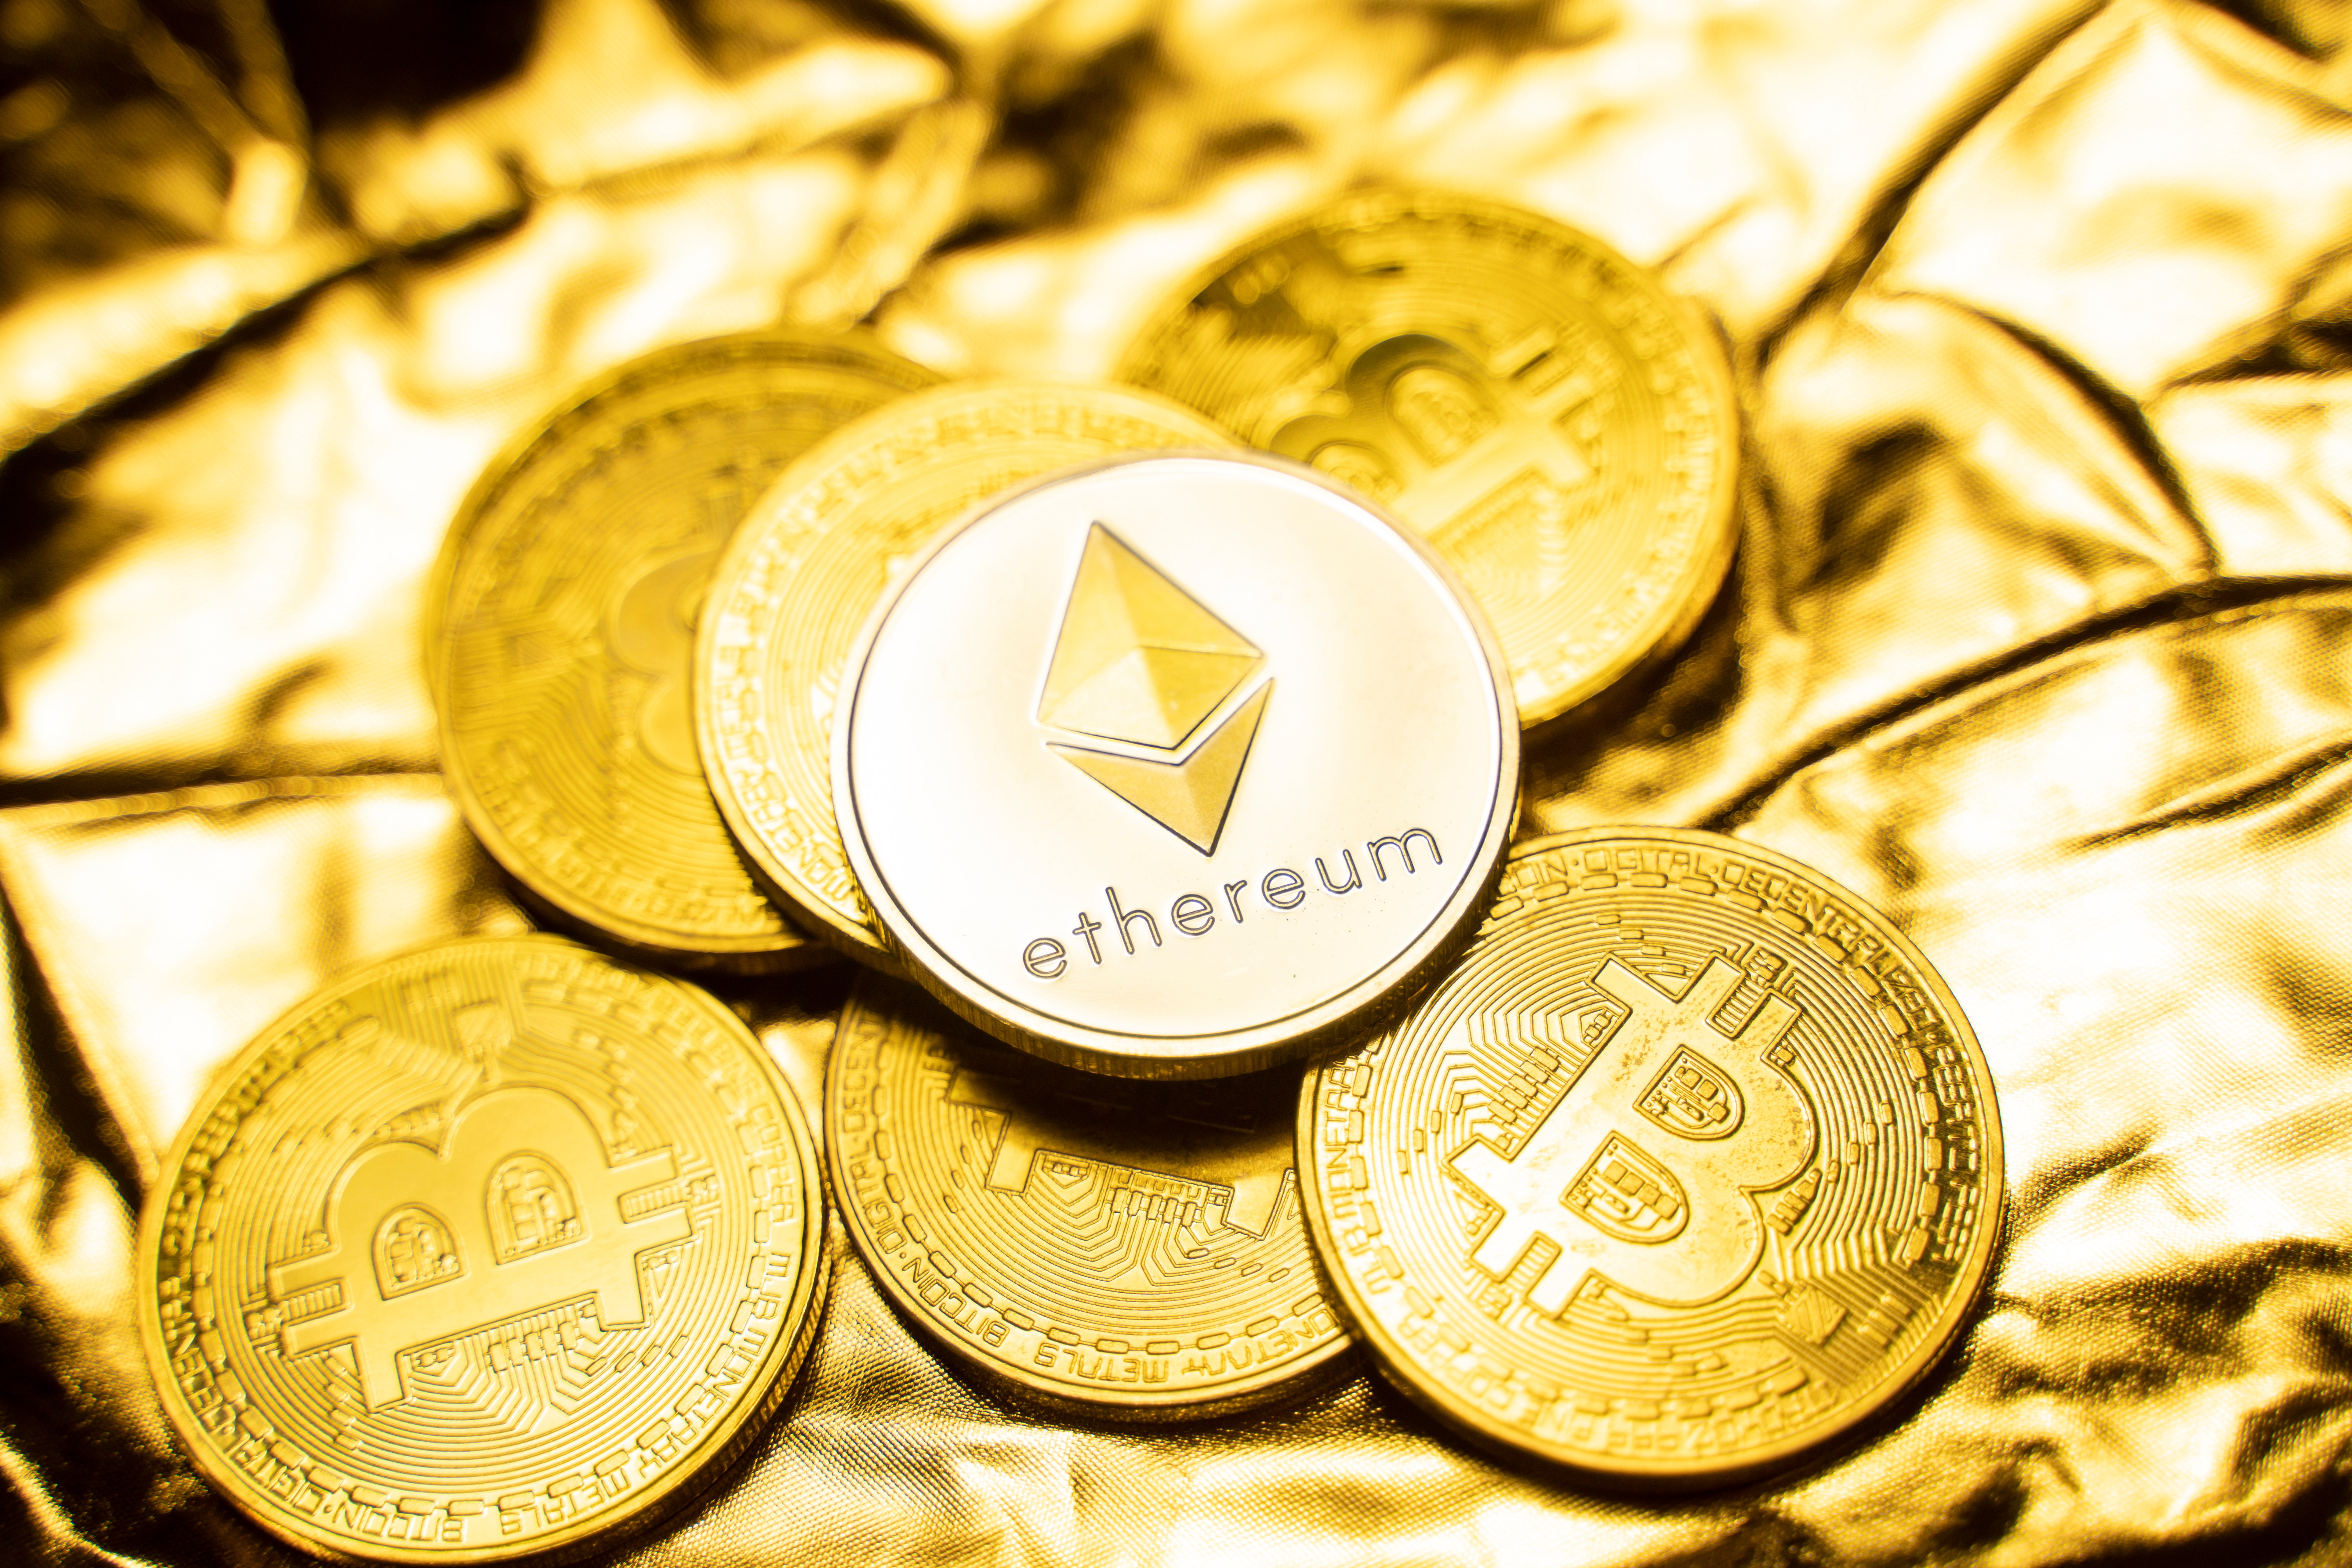 Ethereum's Price Could Decouple From Bitcoin, Other Cryptos After Merge: Chainalysis